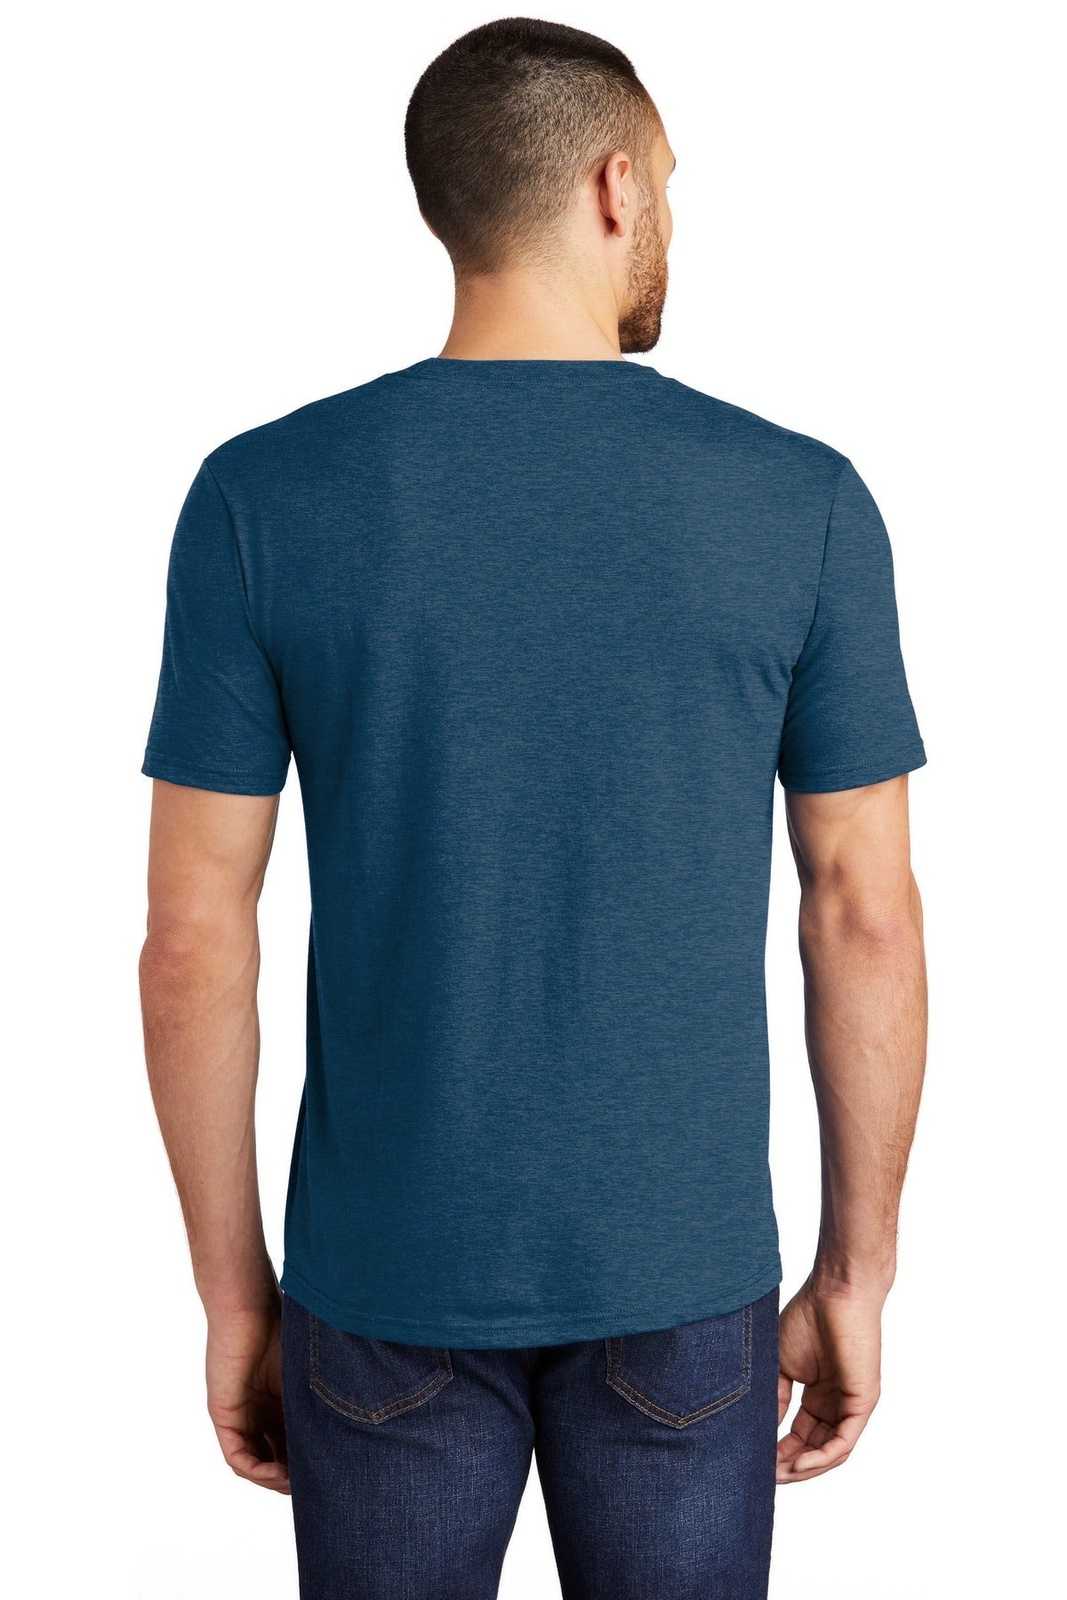 District DM130 Perfect Tri Tee - Heathered Neptune Blue - HIT a Double - 1